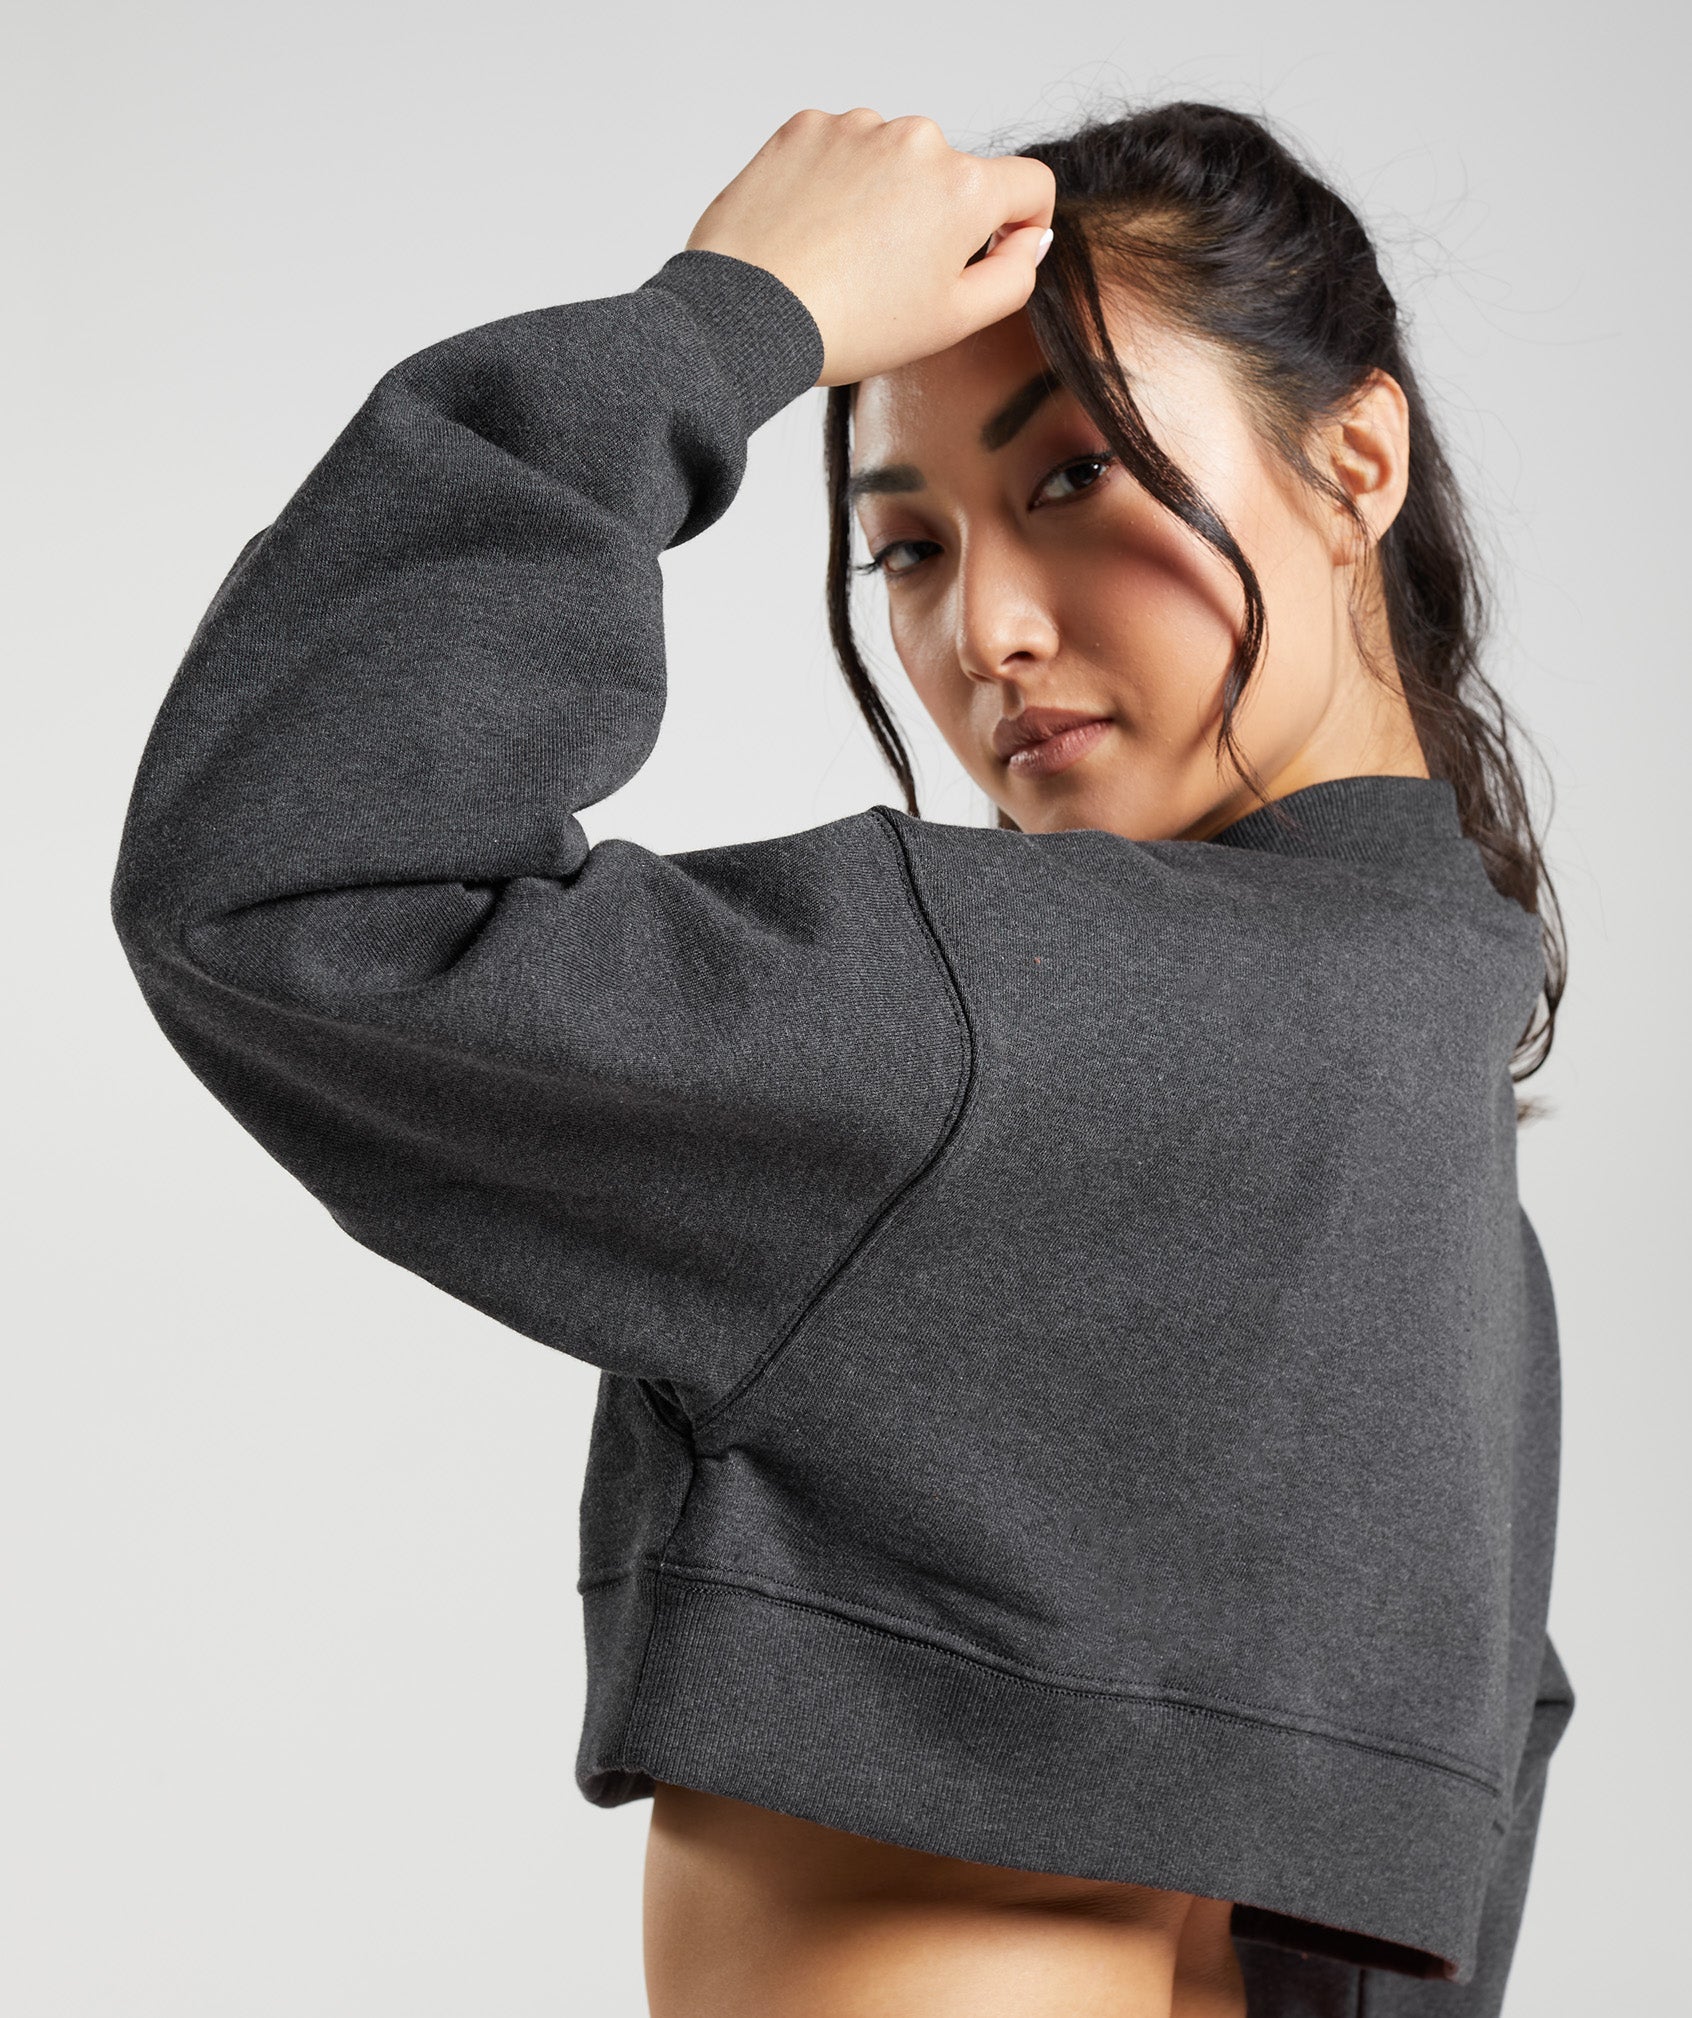 Rest Day Sweats Cropped Pullover product image 5